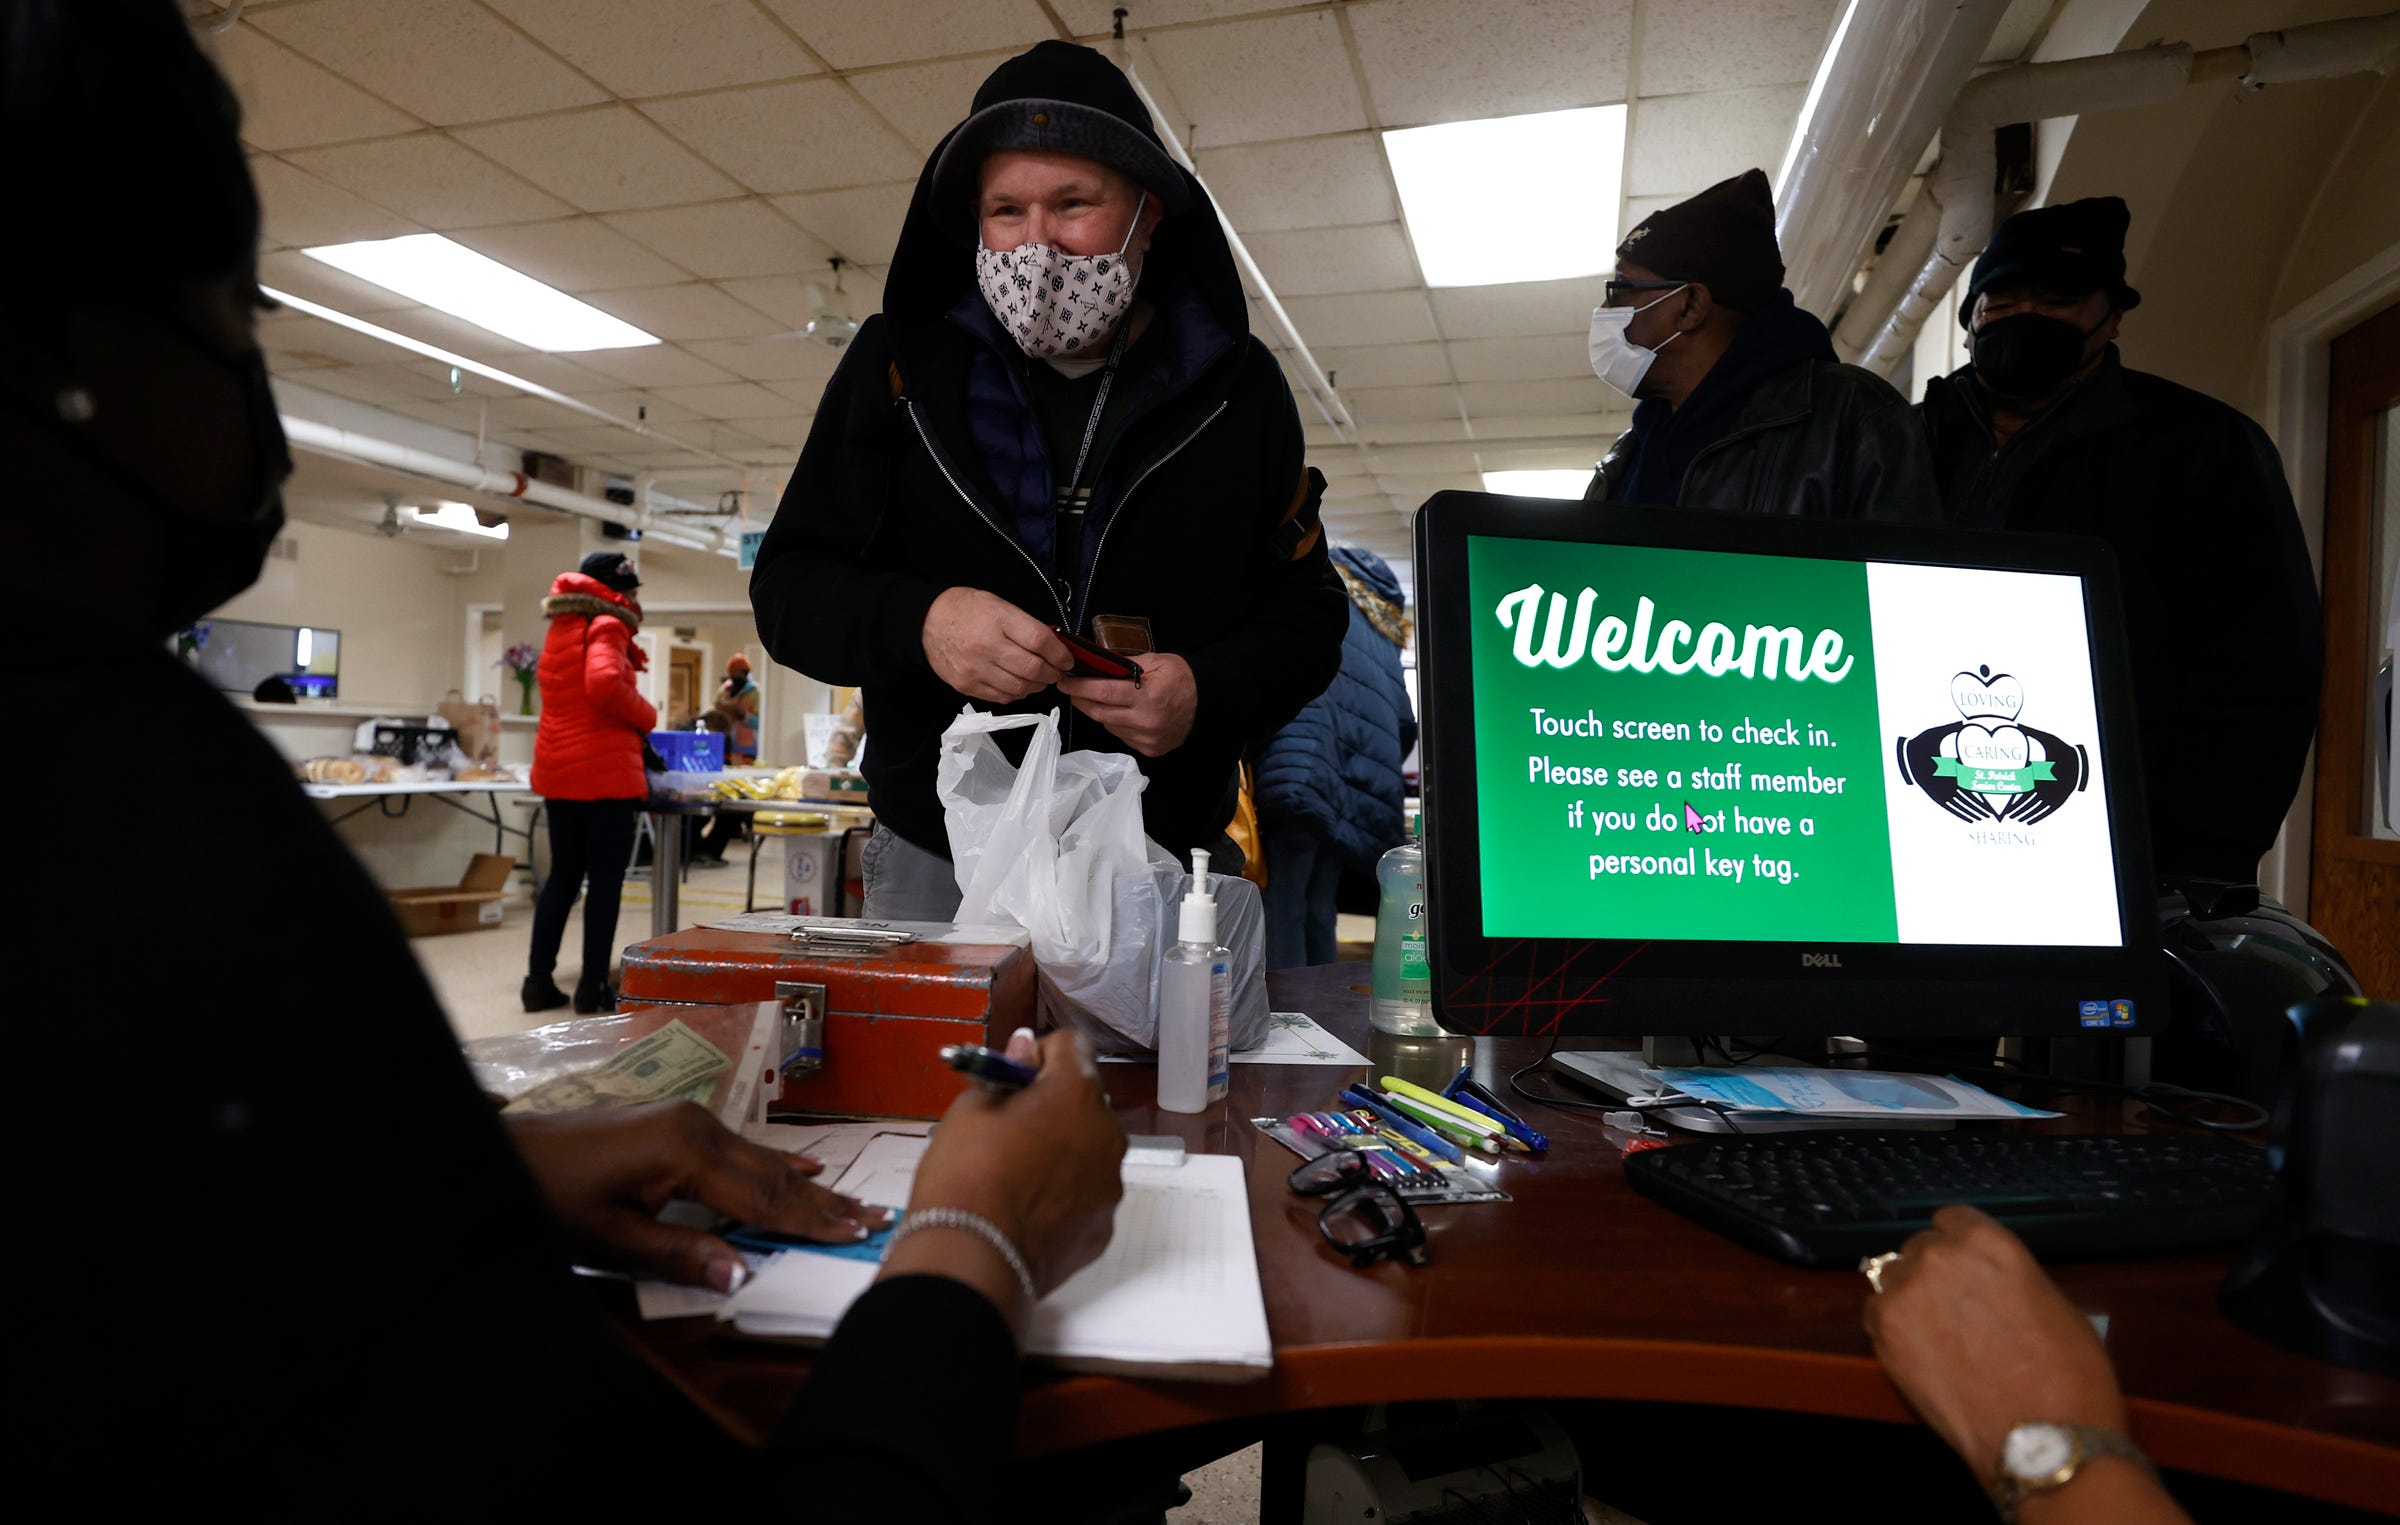 Daniel Spyker, 69 of Detroit talks with staff at the St. Patrick Senior Center in Detroit on Wednesday, March 2, 2022, after presenting his membership card and paying $4 for two complete meals to take home.